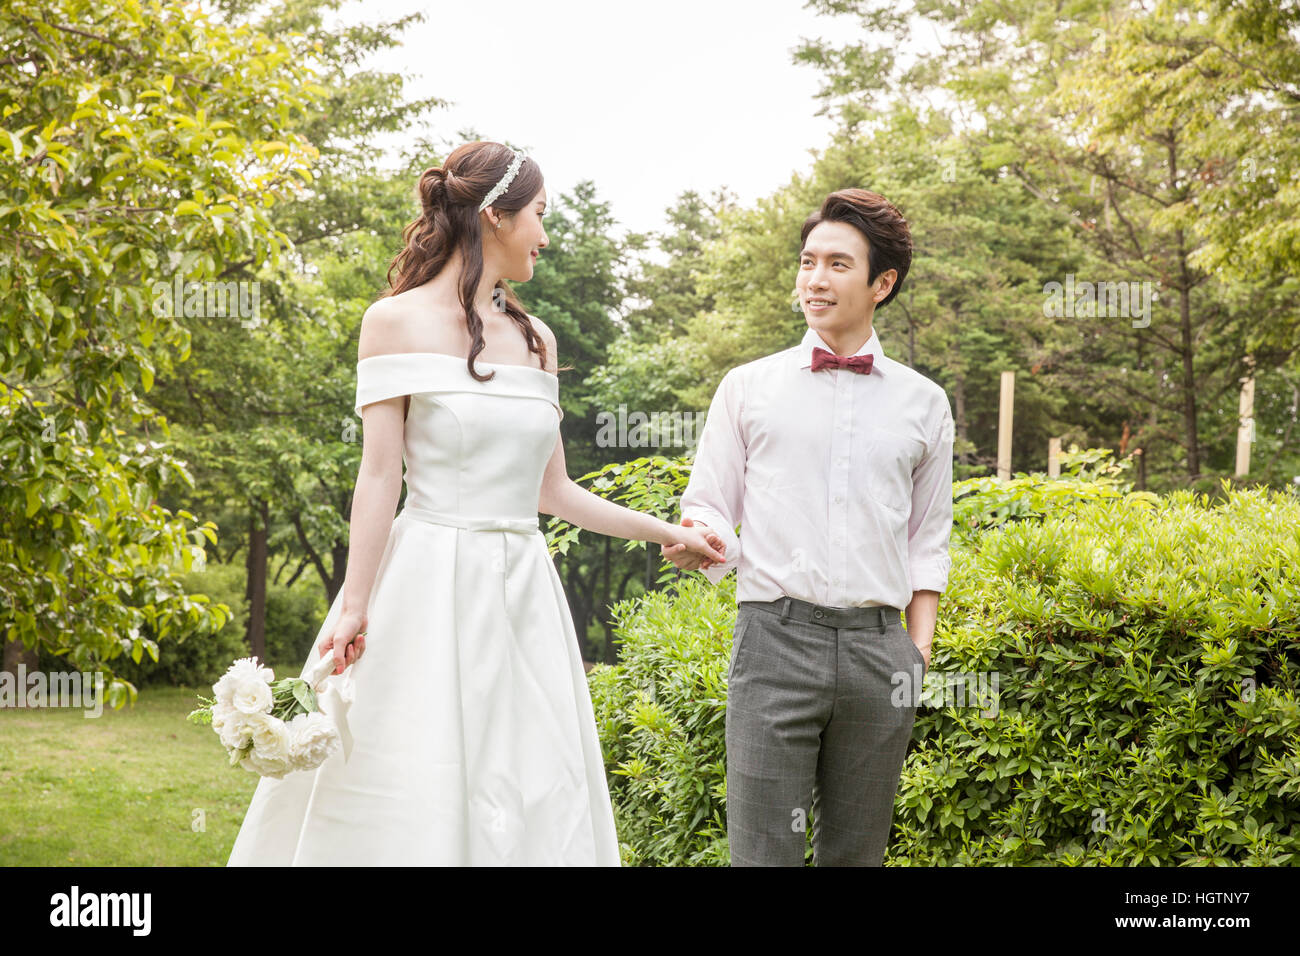 Young smiling wedding couple holding hands face to face outdoors Stock Photo